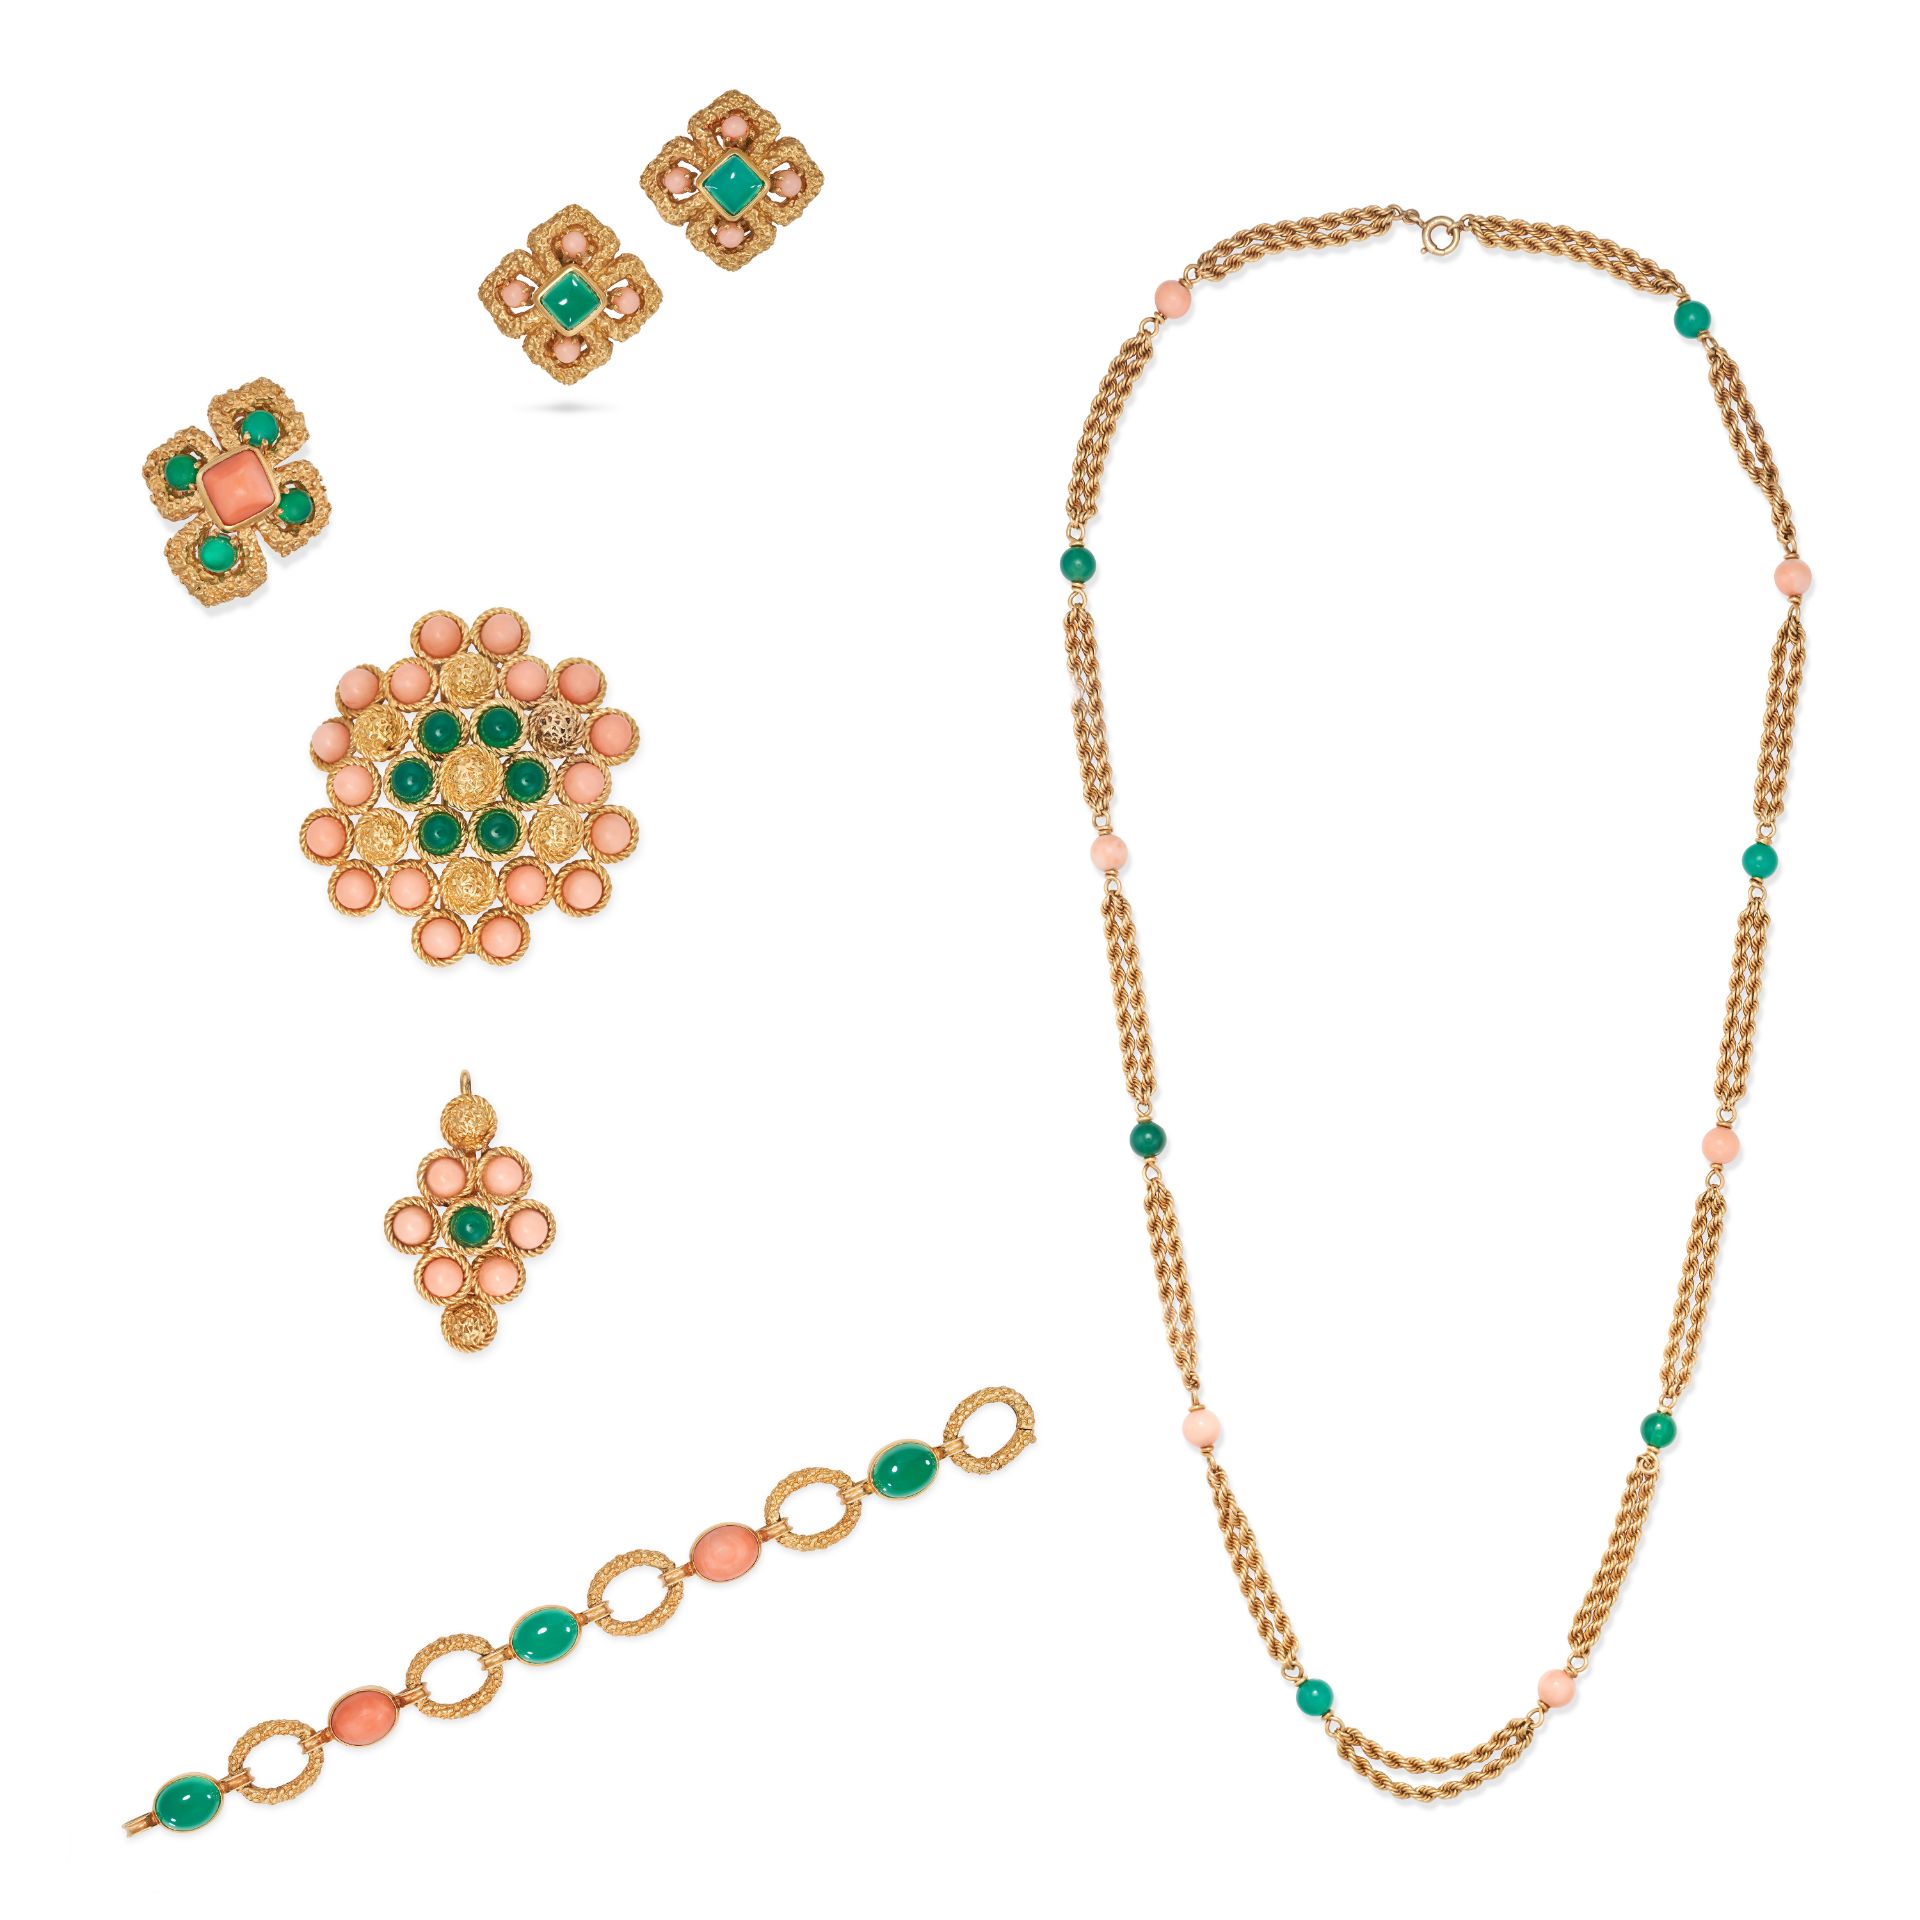 VAN CLEEF & ARPELS, A COLLECTION OF FRENCH CORAL AND CHRYSOPRASE VAN CLEEF & ARPELS JEWELLERY in ...